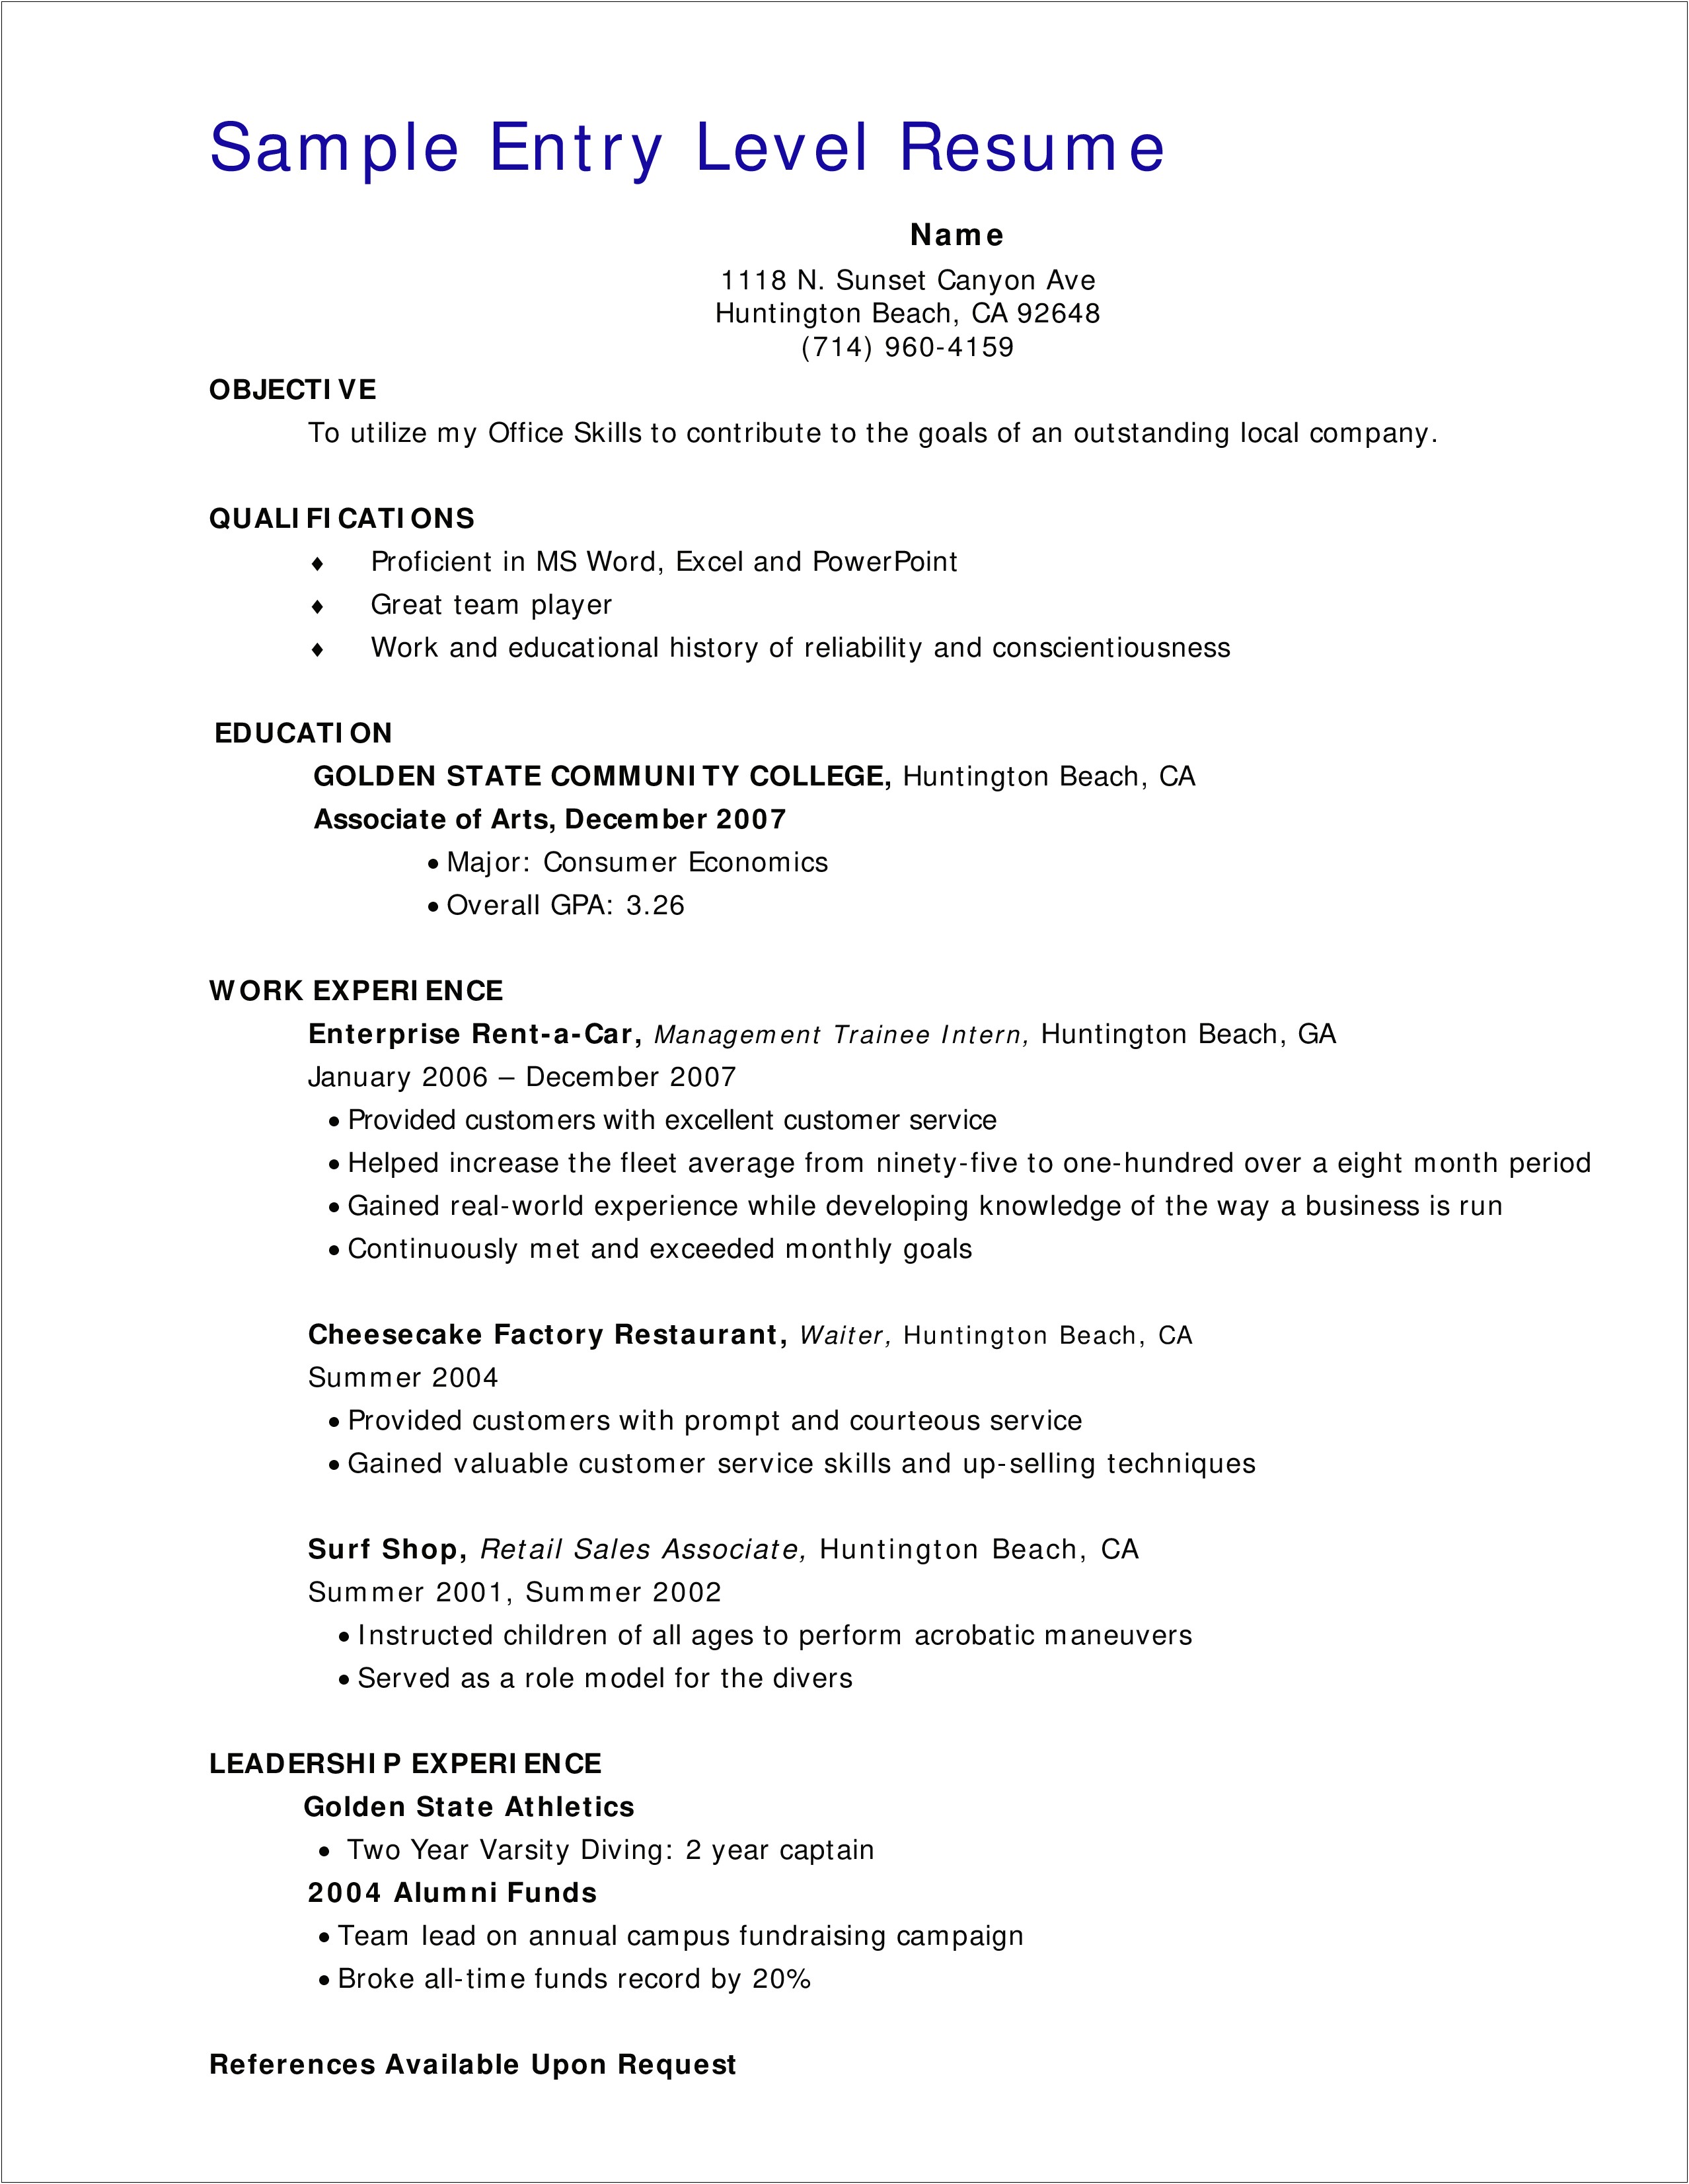 Resume For Sales Associate With No Work Experience